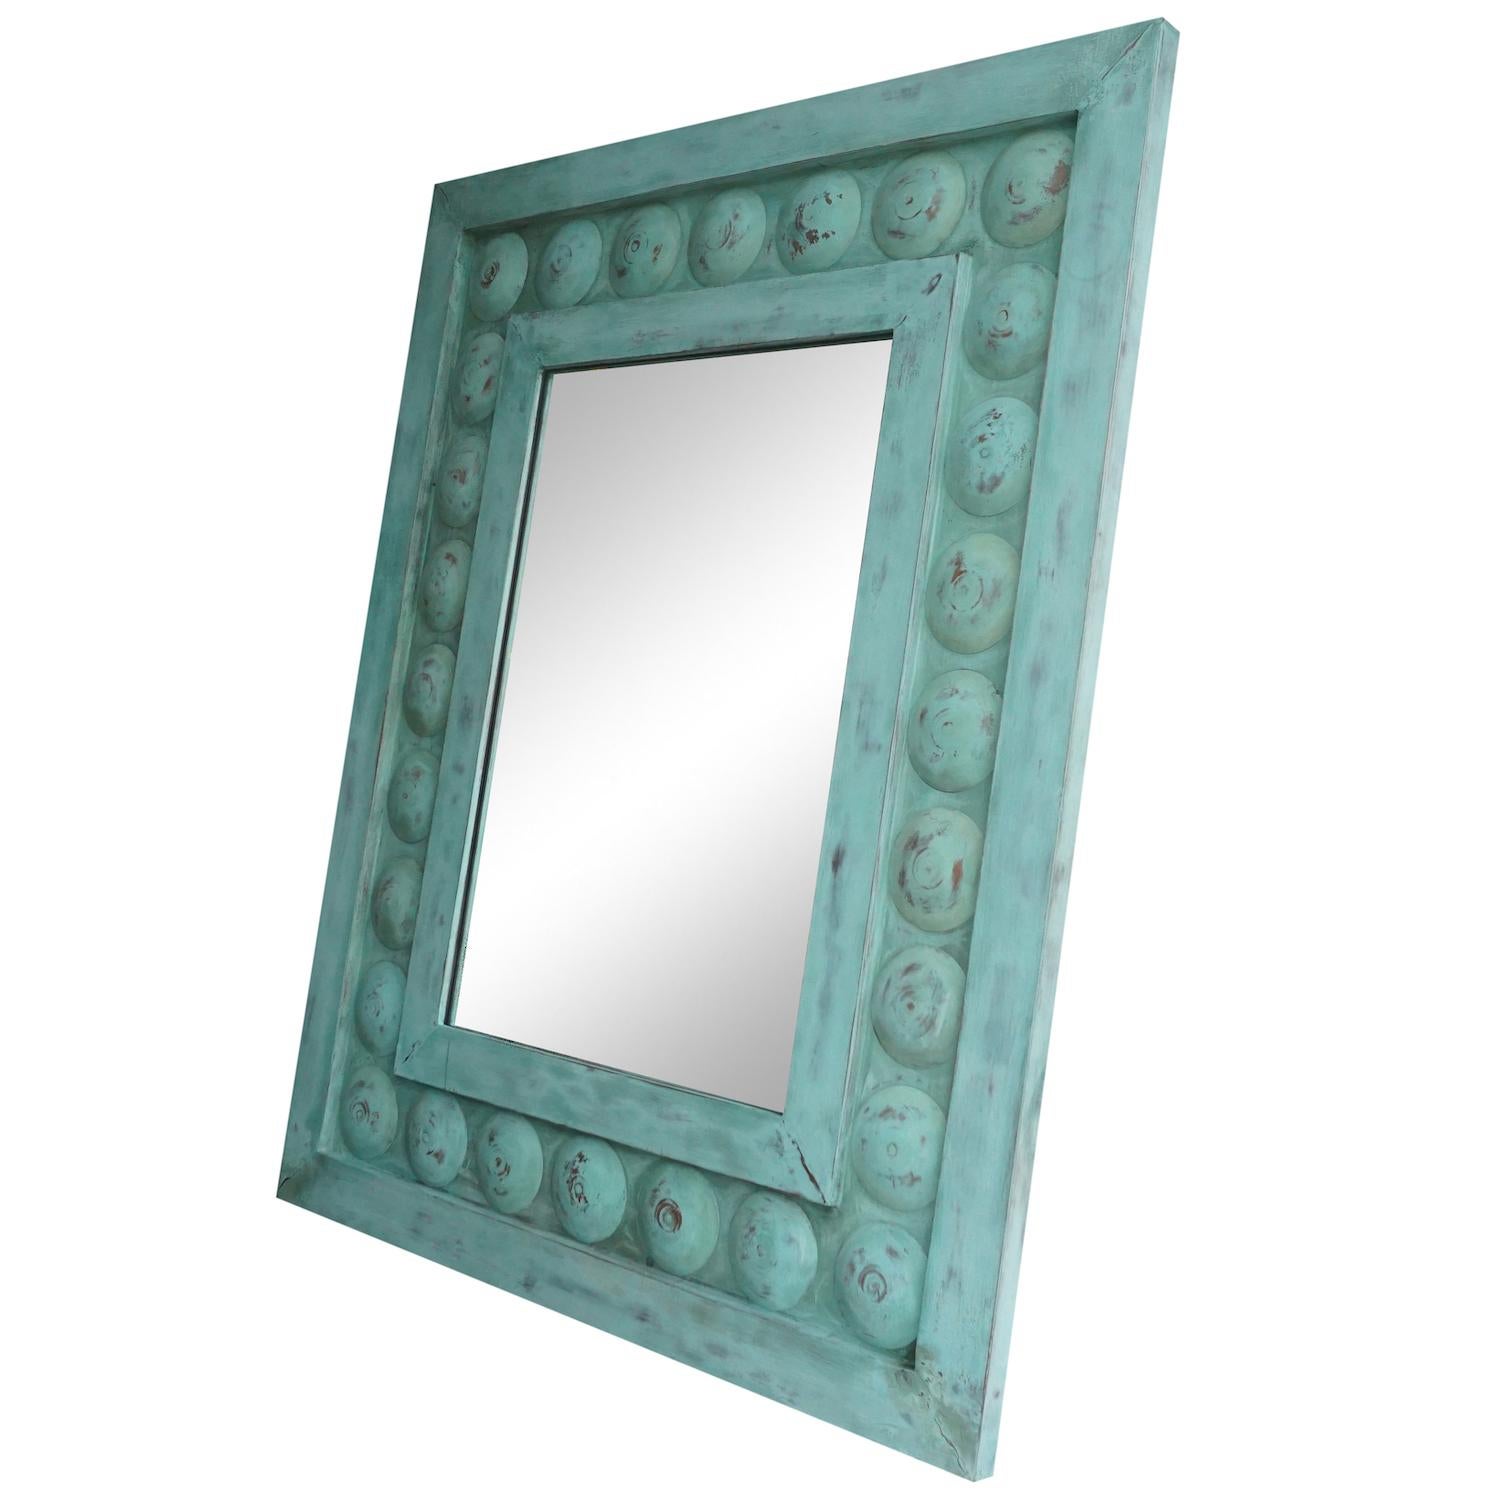 Hand-Crafted 20th Century Light-Green French Vert de Gris Mirror, Large Copper Trumeau Mirror